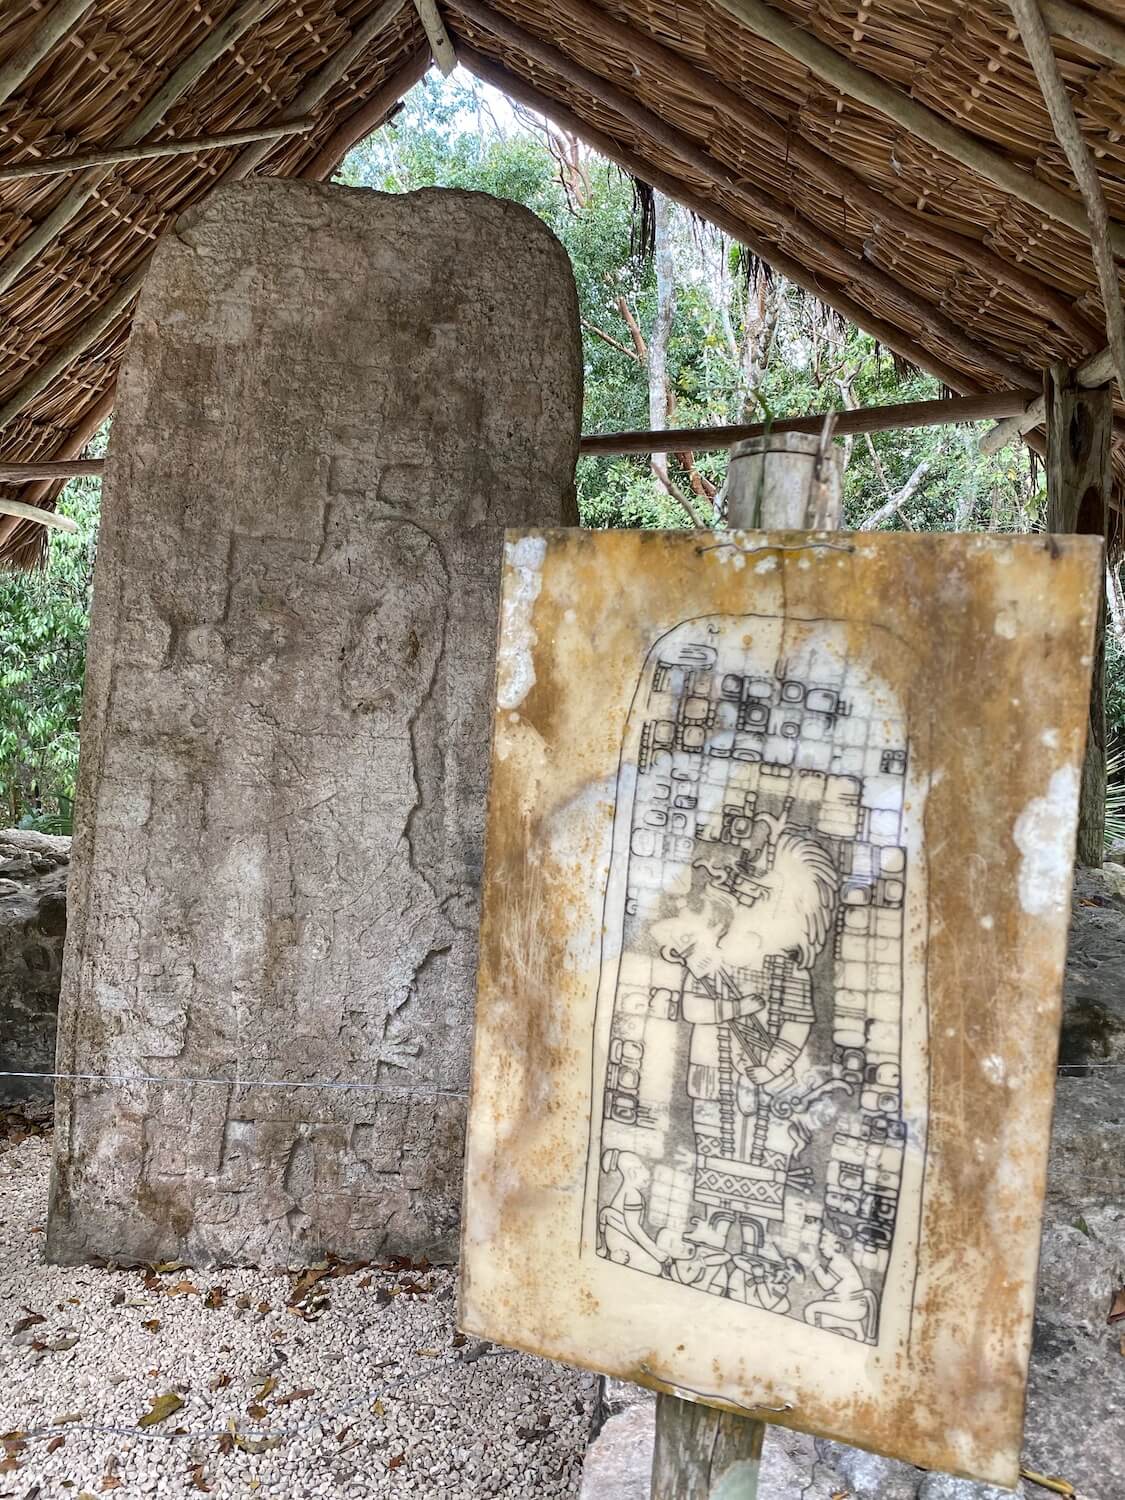 A closeup view of Stele 1 in the Macanxoc Group of the ancient Mayan Ruins of Coba.  The Stele is a tall piece of etched stone with faint outlines depicting the Mayan calendar with the end of days date of December 21, 2012.  